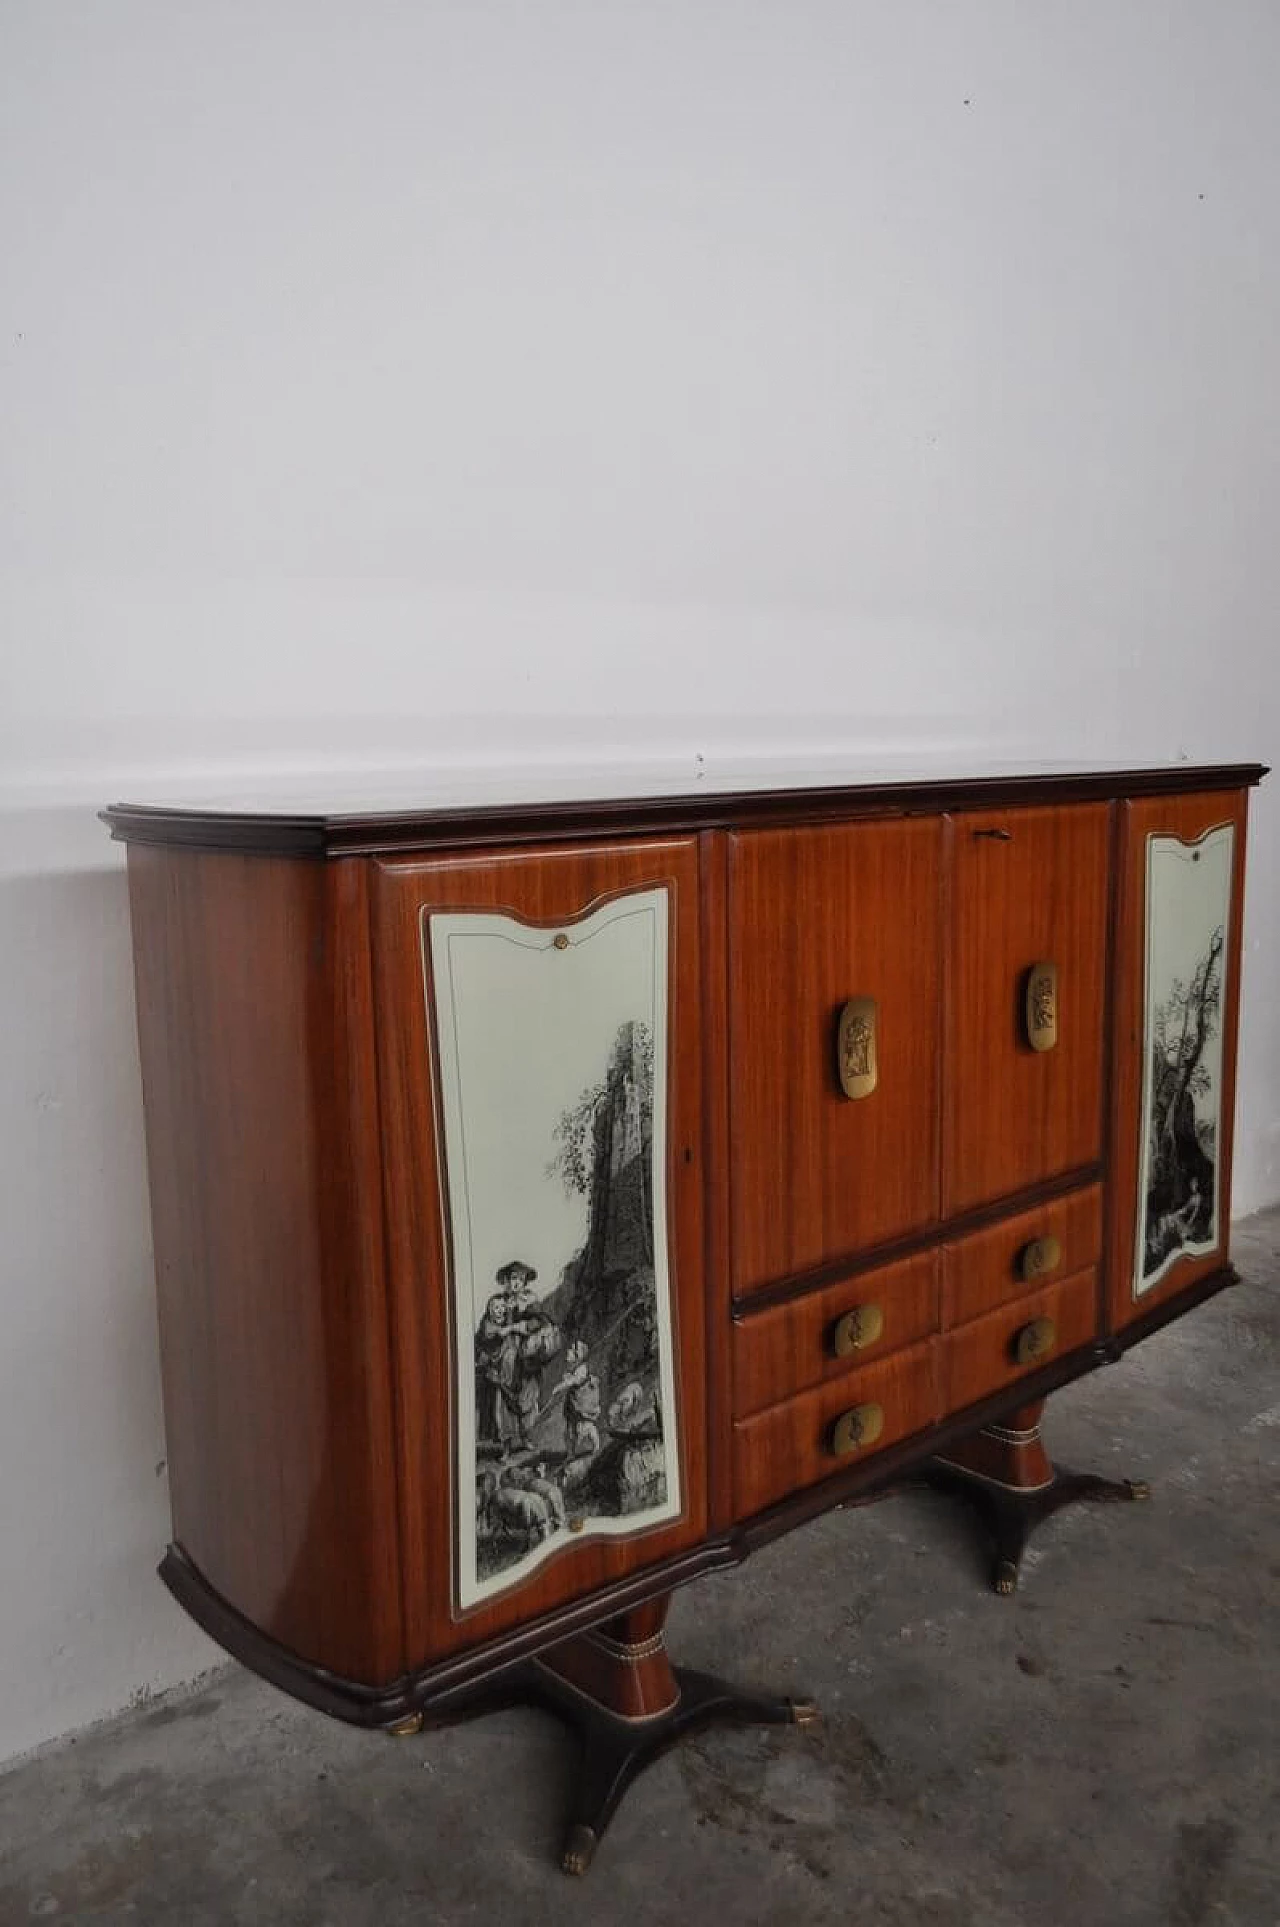 Mahogany, pearwood, brass and glass sideboard with allegorical designs by F.lli Rigamonti Desio, 1940s 1374032